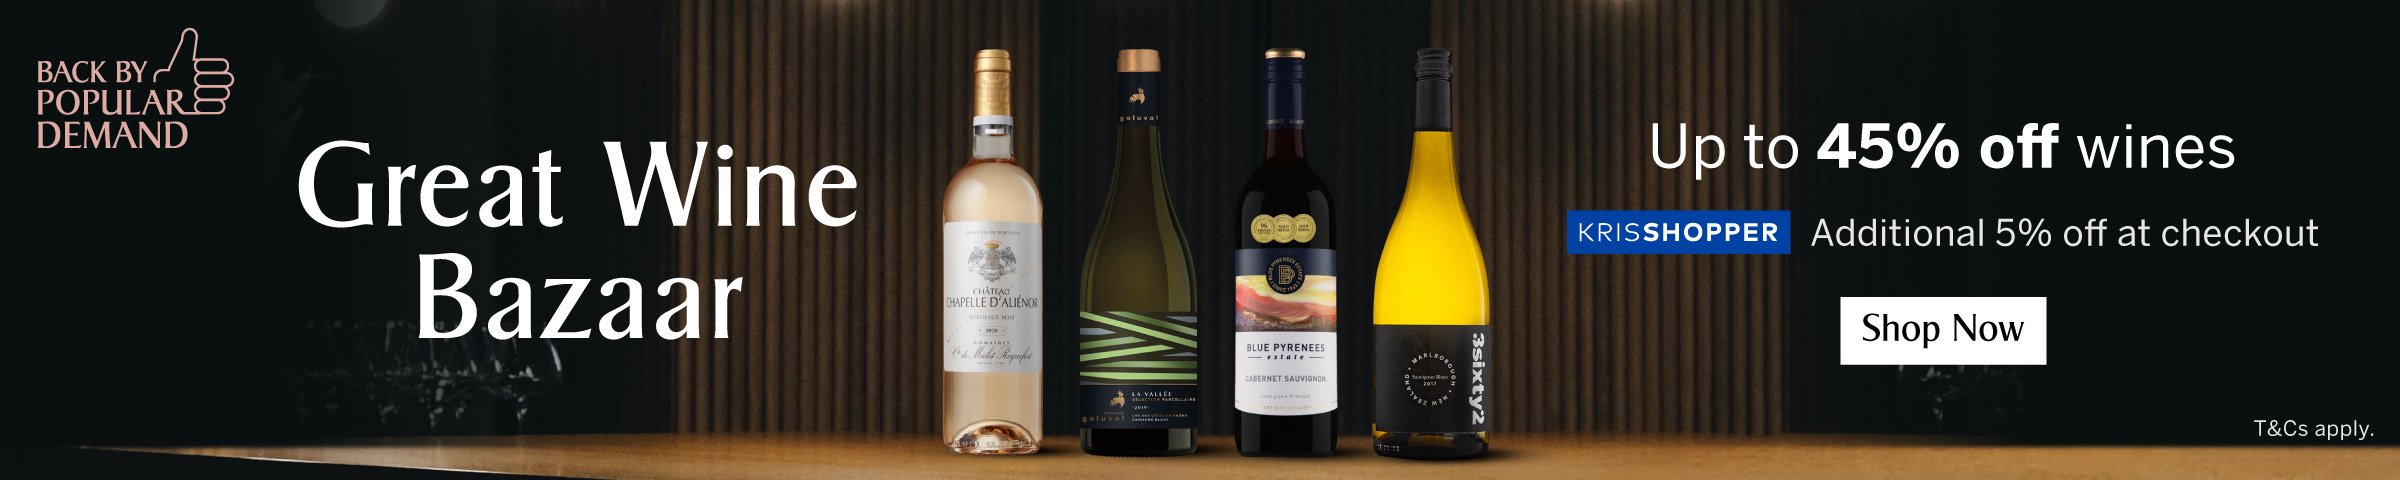 Great Wine Bazaar - Up to 45% off wines + extra 5% off at checkout